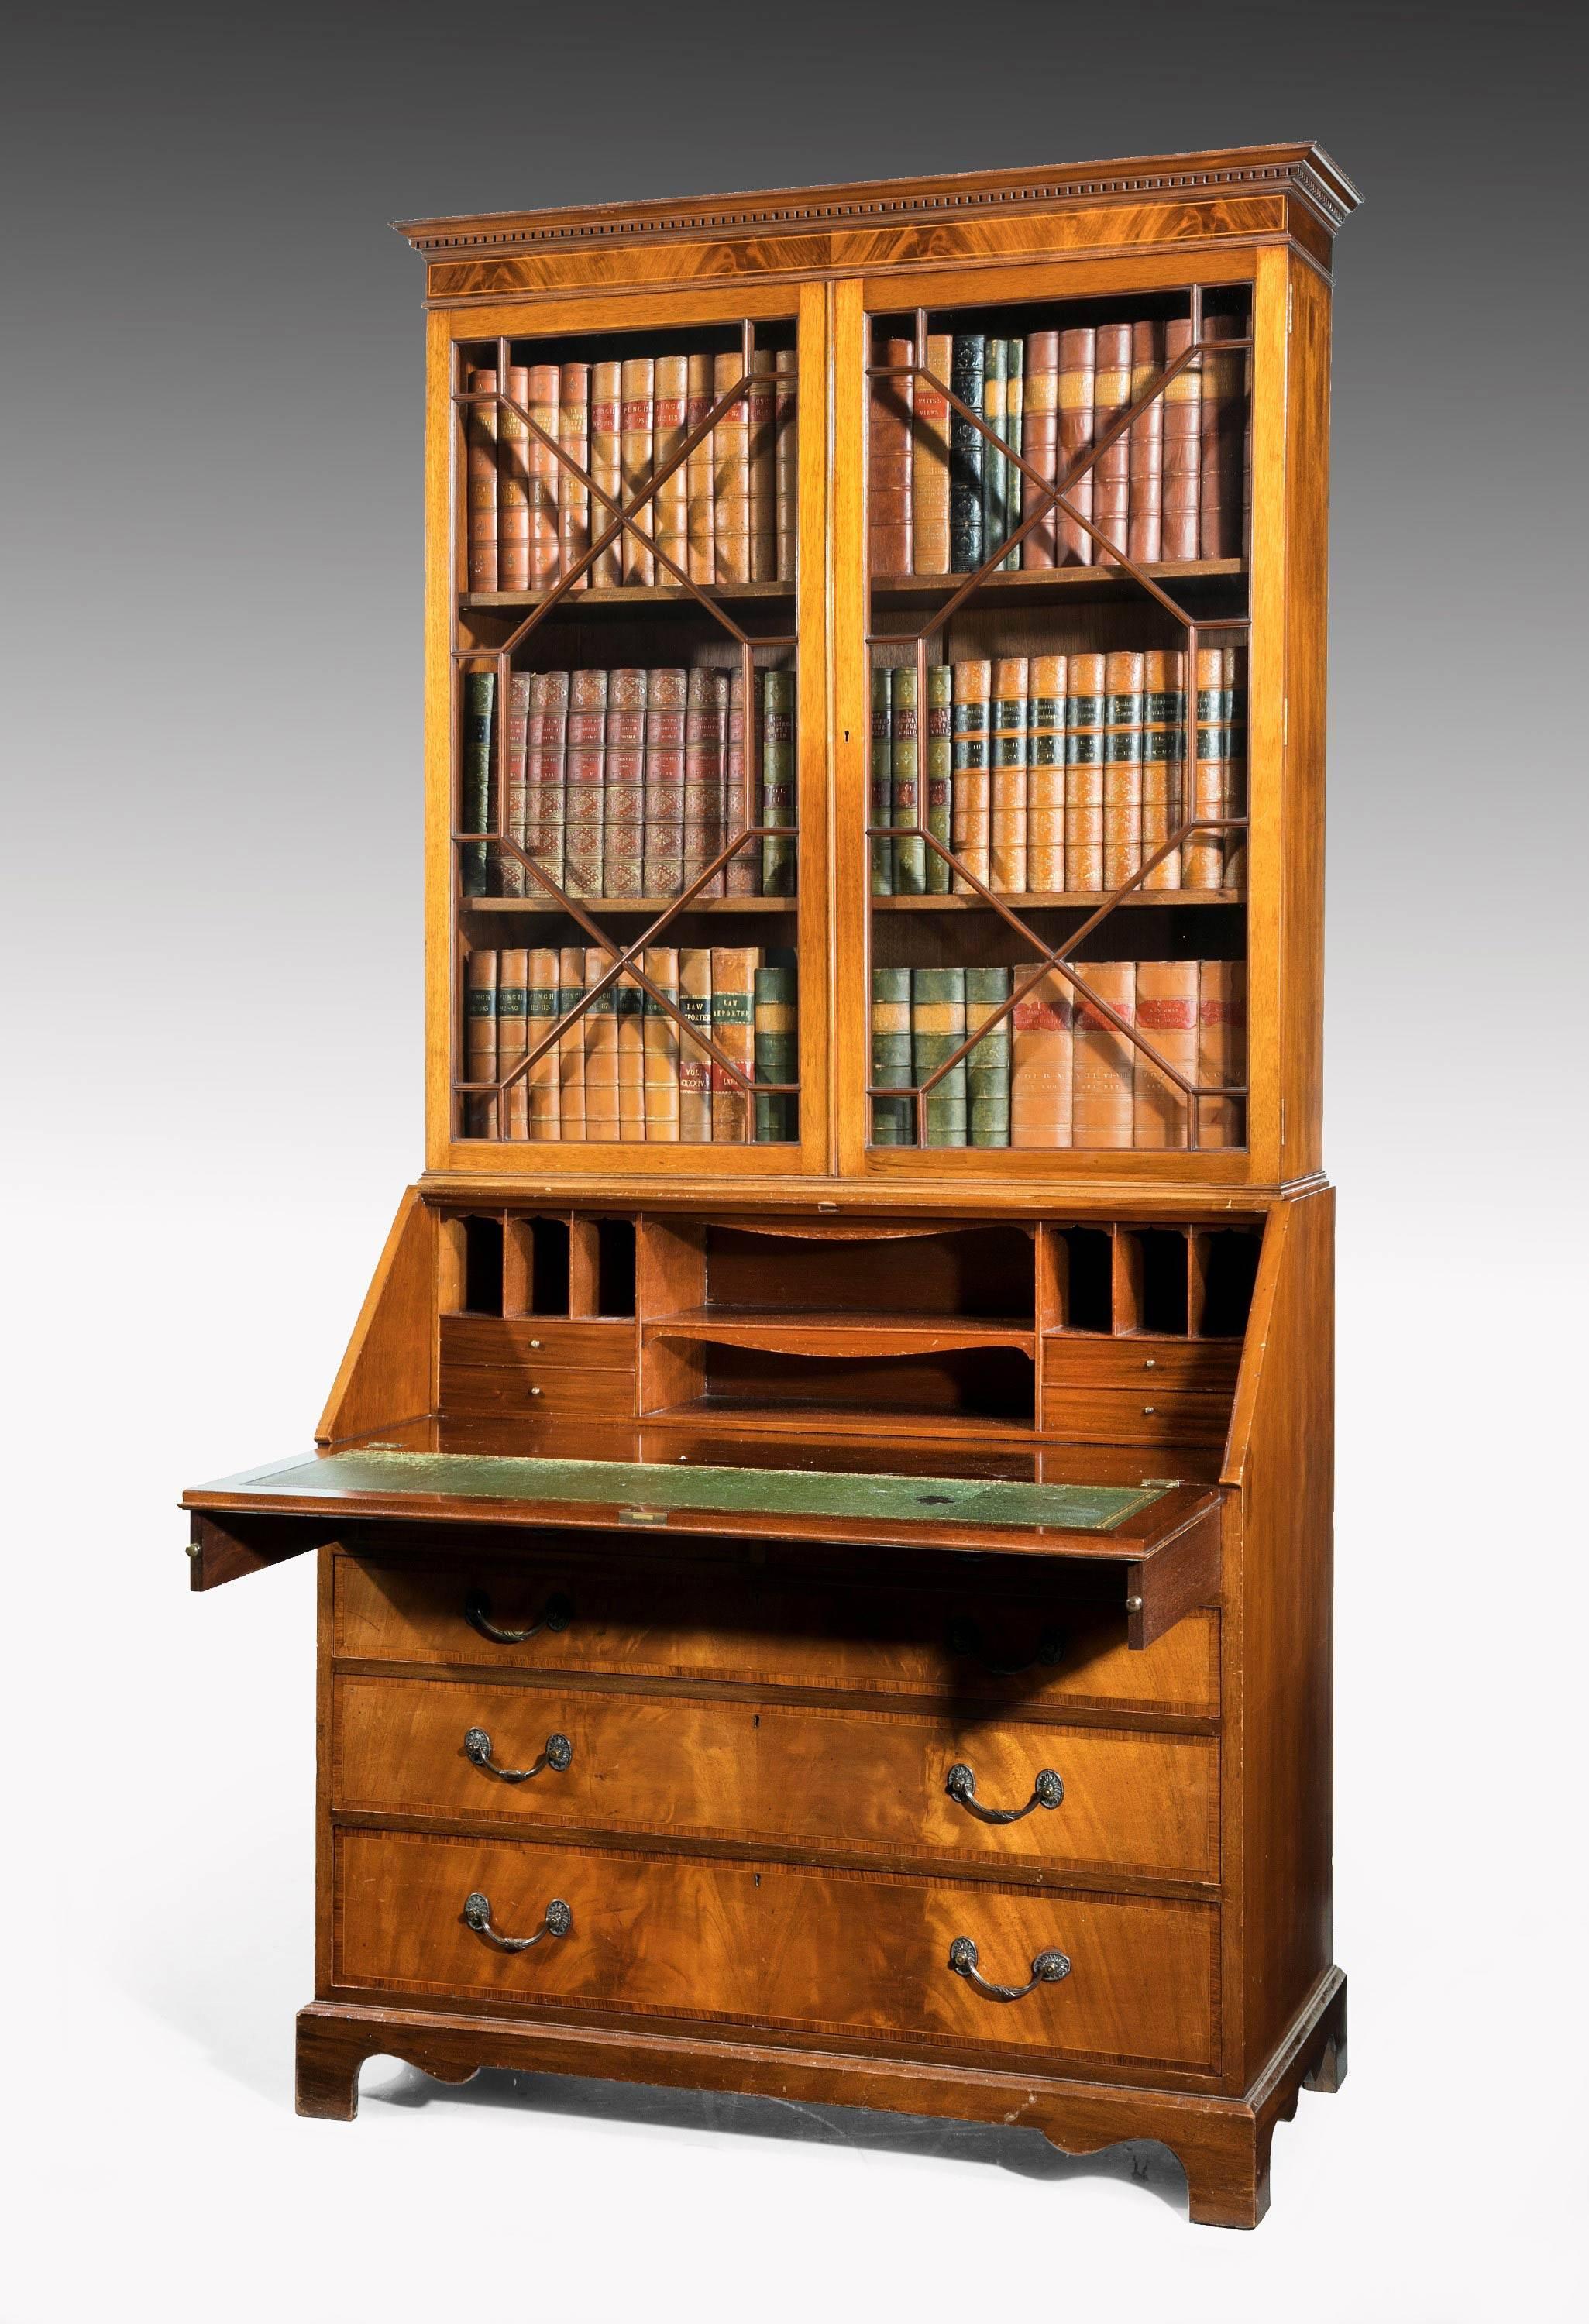 George III Period Mahogany Bureau Bookcase with Finely Matched Timbers In Good Condition In Peterborough, Northamptonshire